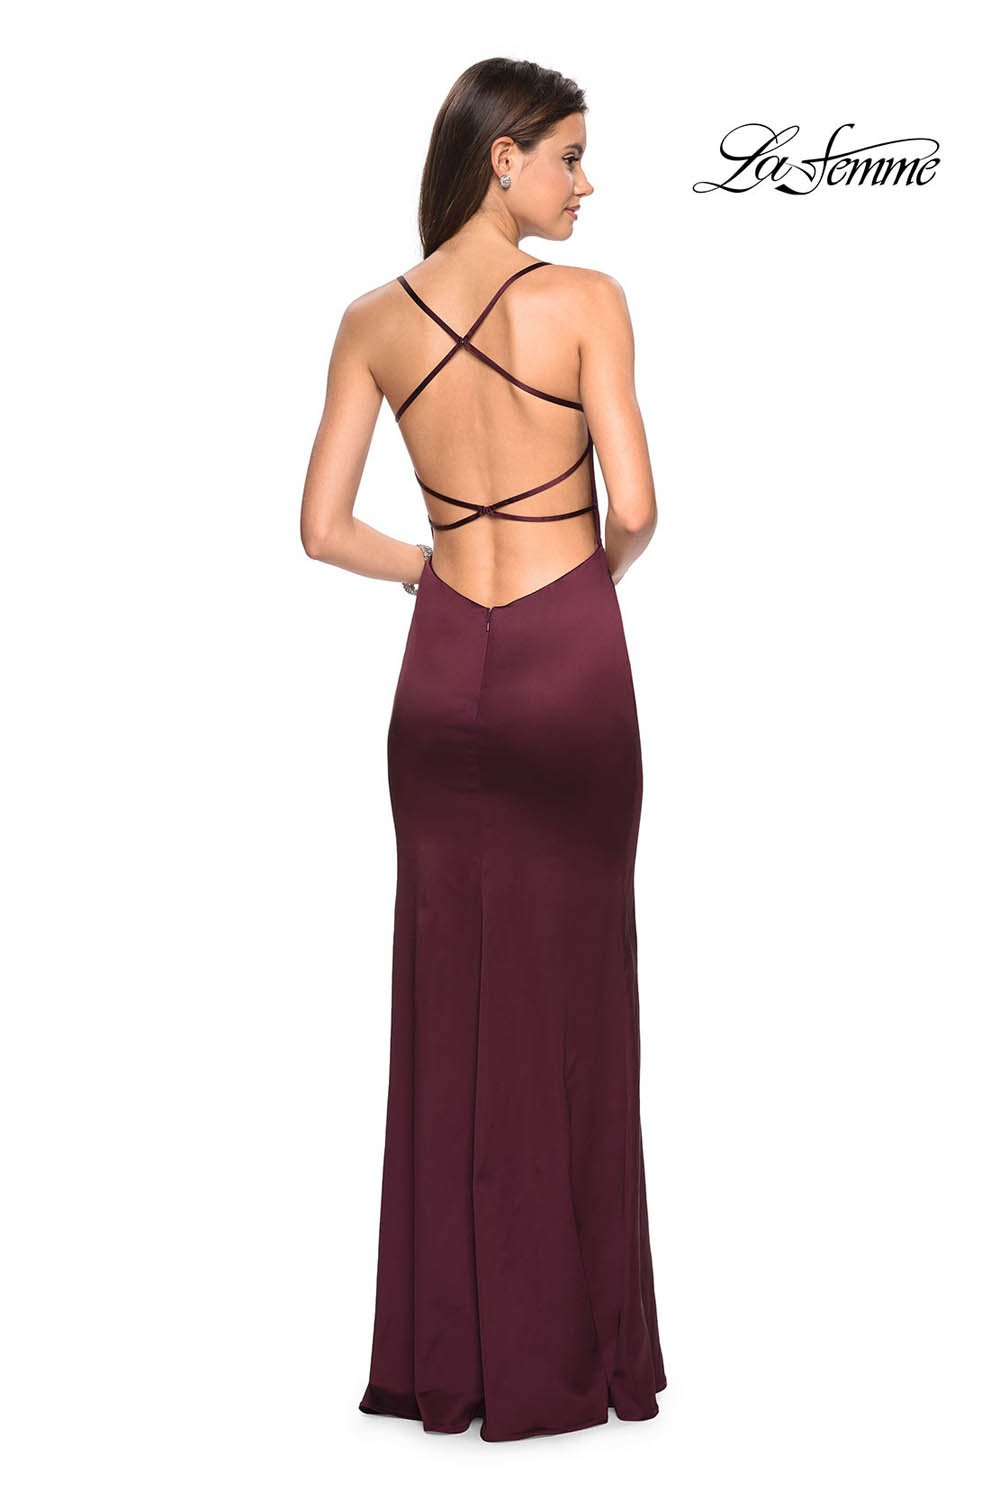 La Femme 27758 dress images in these colors: Burgundy.